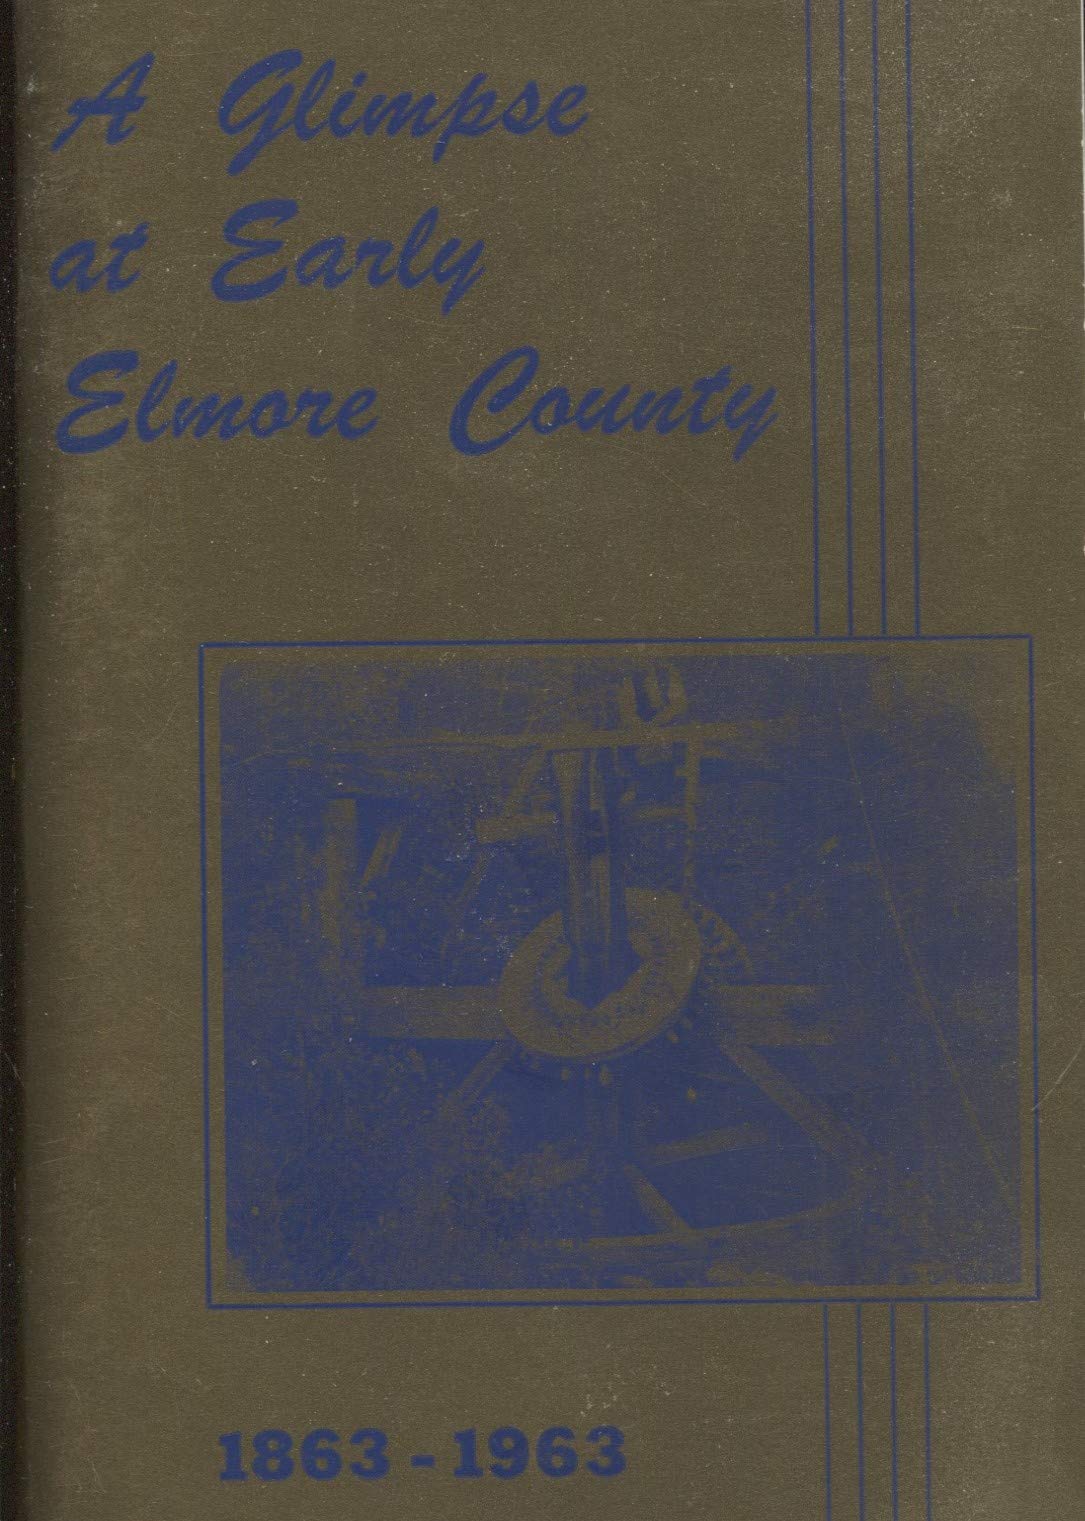 A glimpse at early Elmore County (book cover)